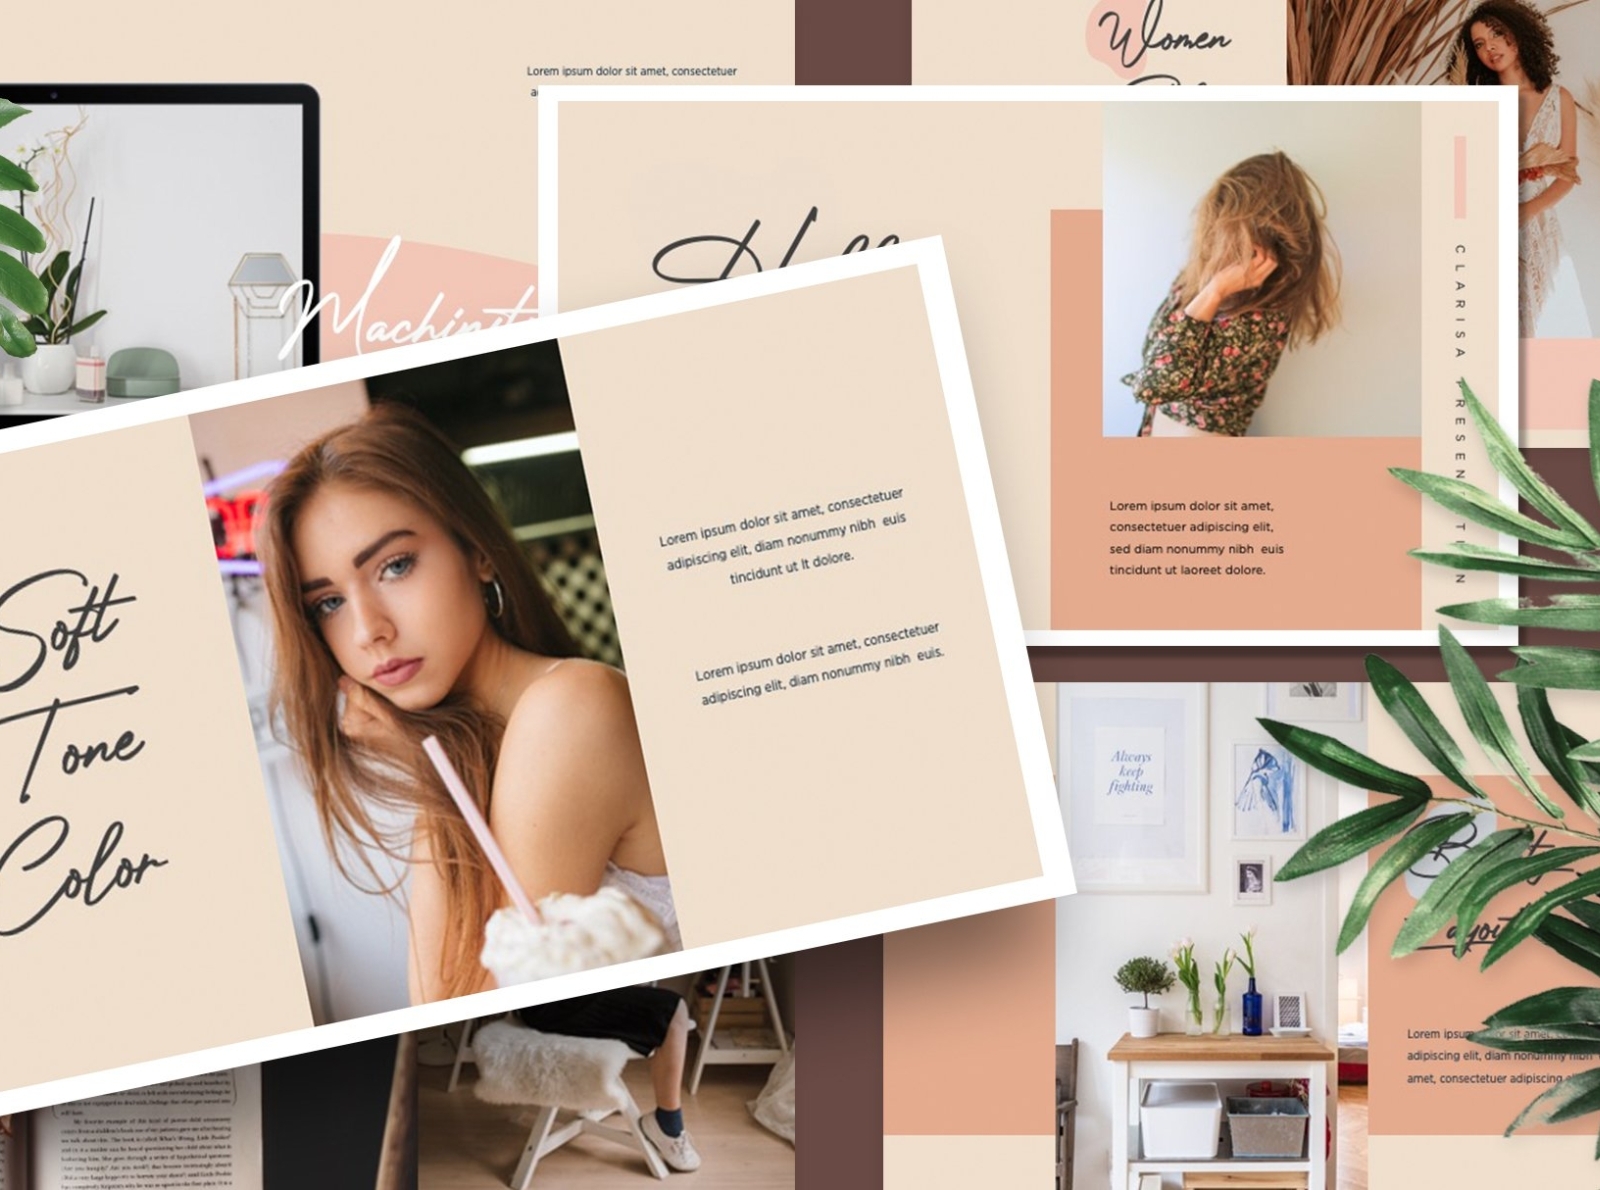 Clarisa - PowerPoint Template by Templates on Dribbble